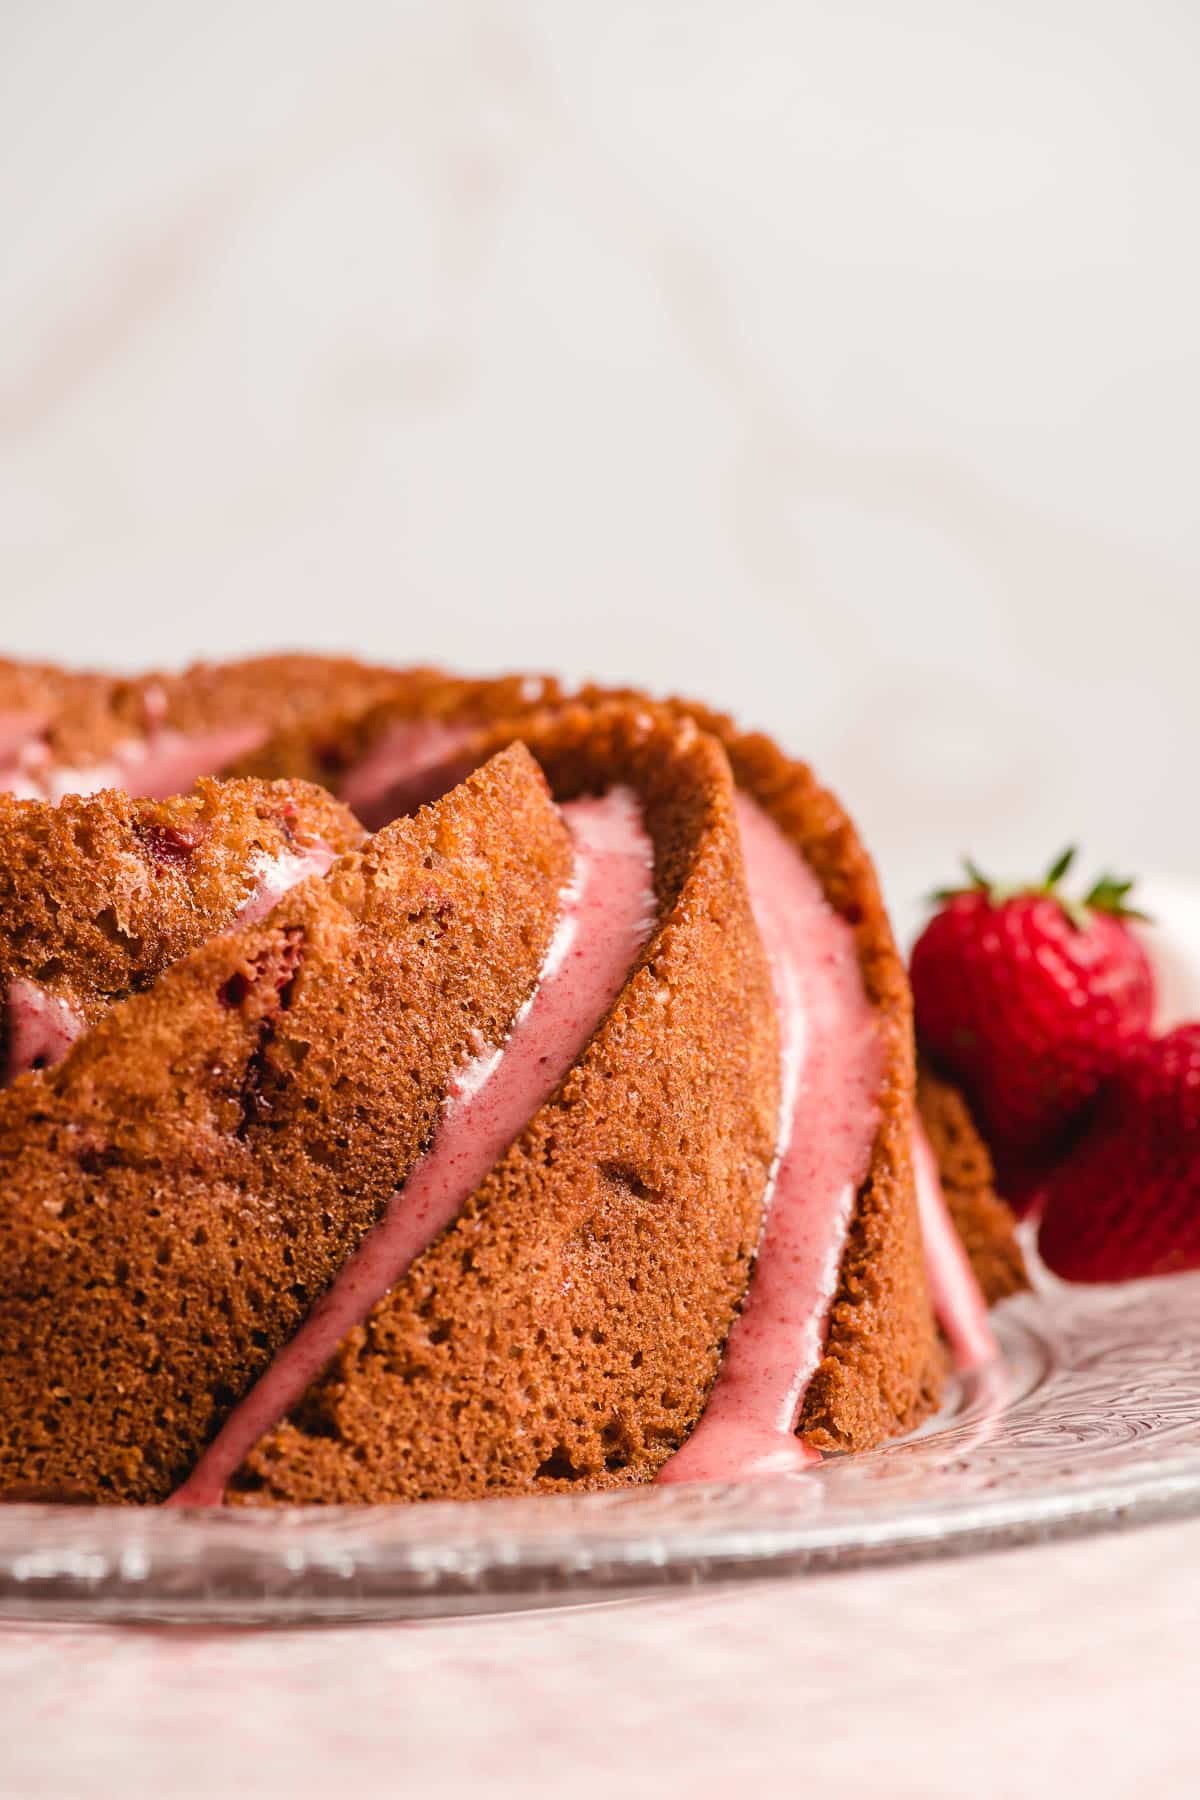 Strawberry Bundt Confection on a glass serving dish with fresh strawberries in the background.